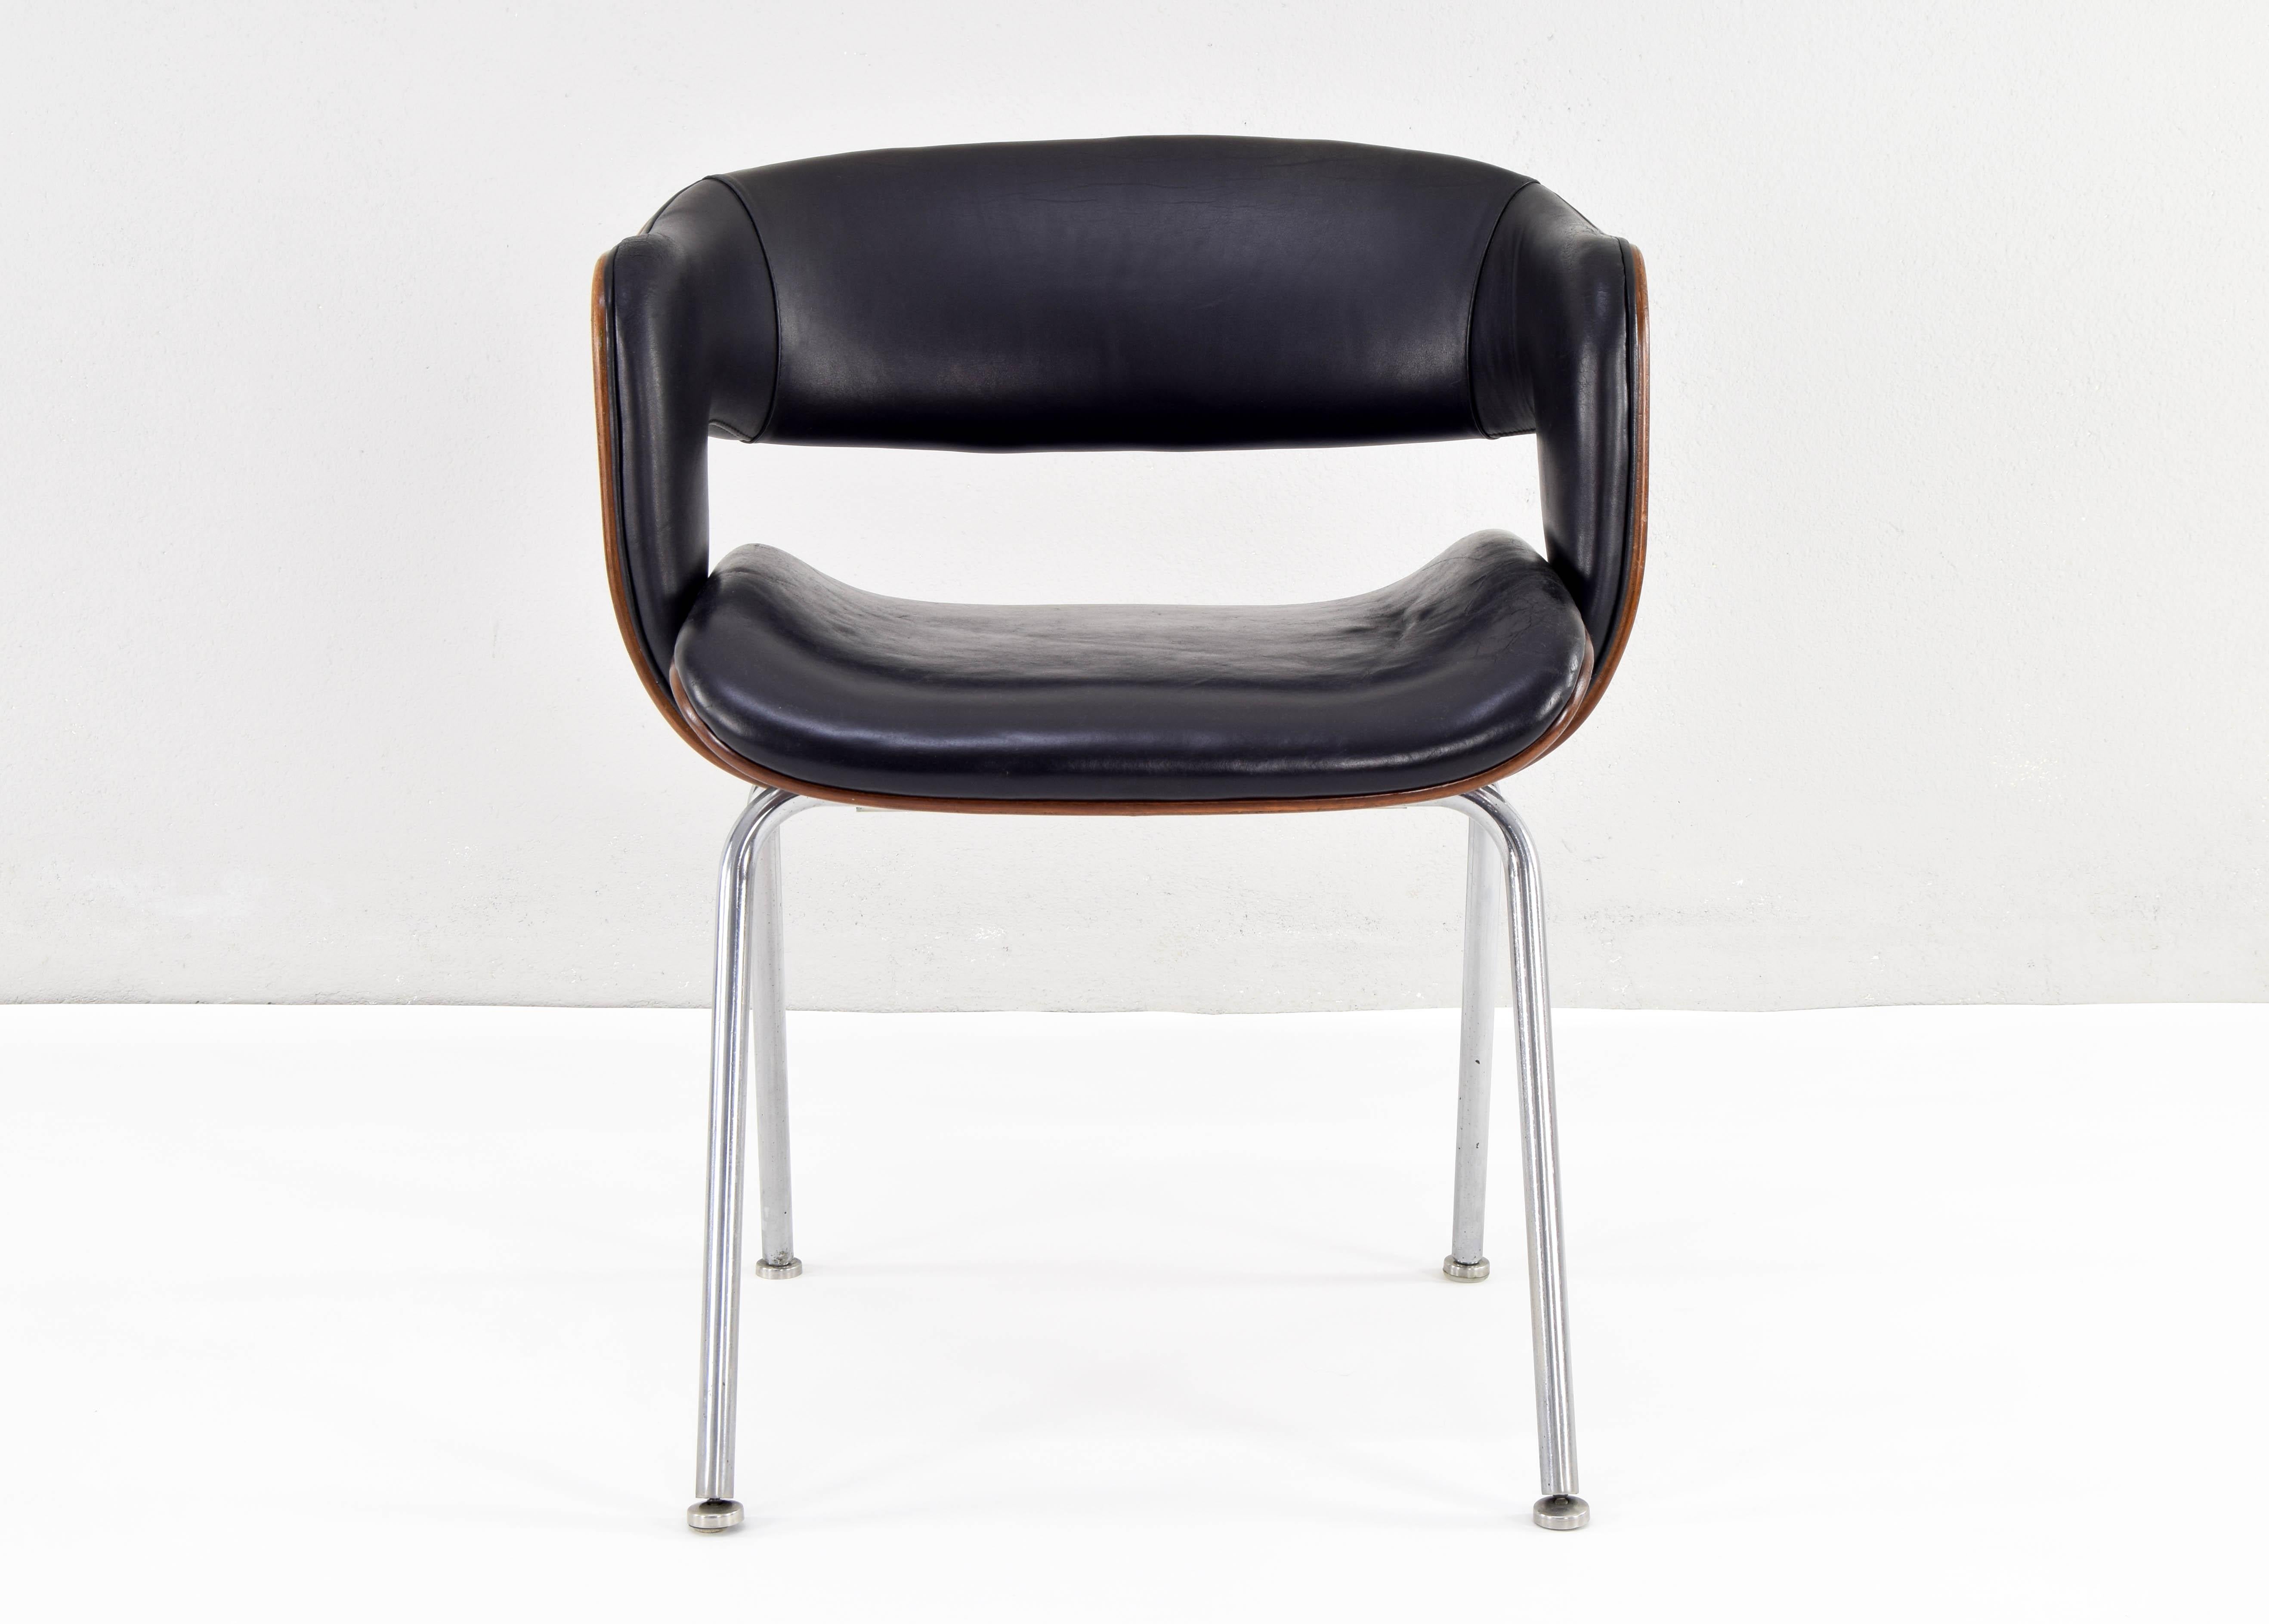 Leather Mid-Century Modern Oxford Chair by Martin Grierson for Arflex, Spain, 1963